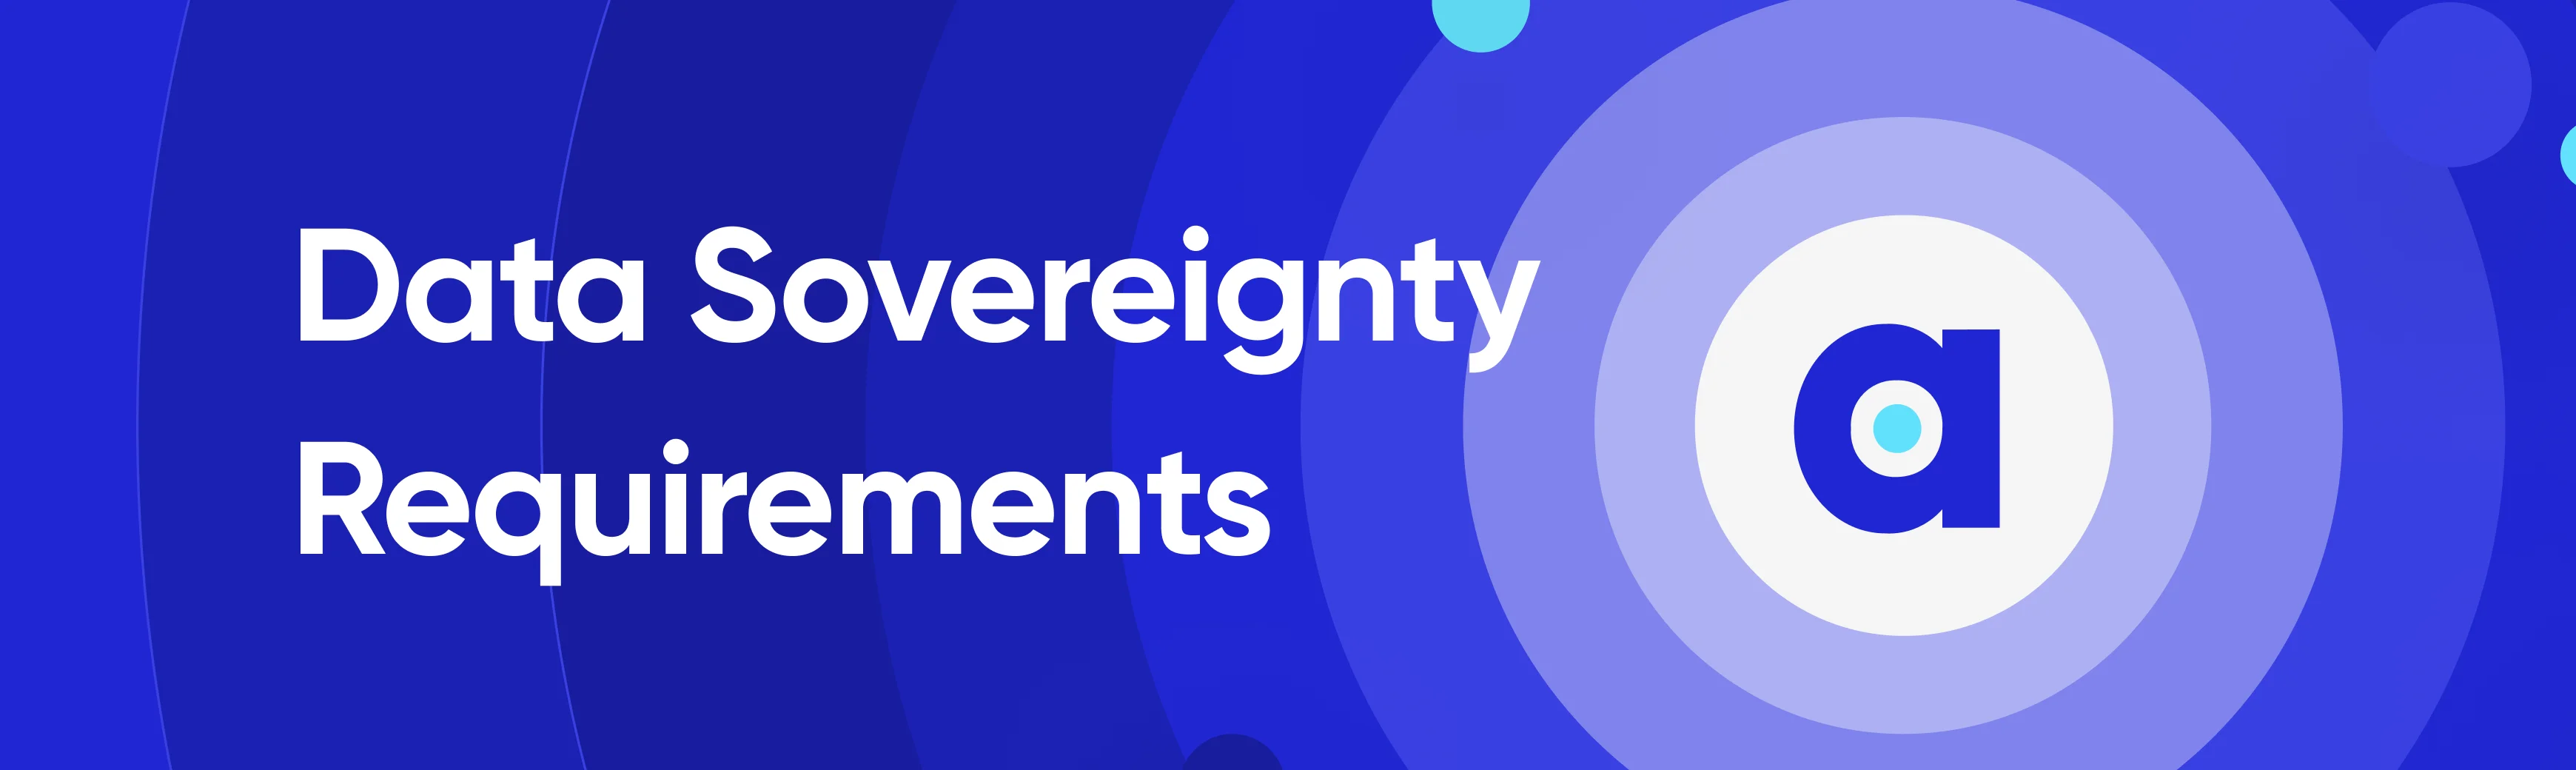 Data Sovereignty Requirements